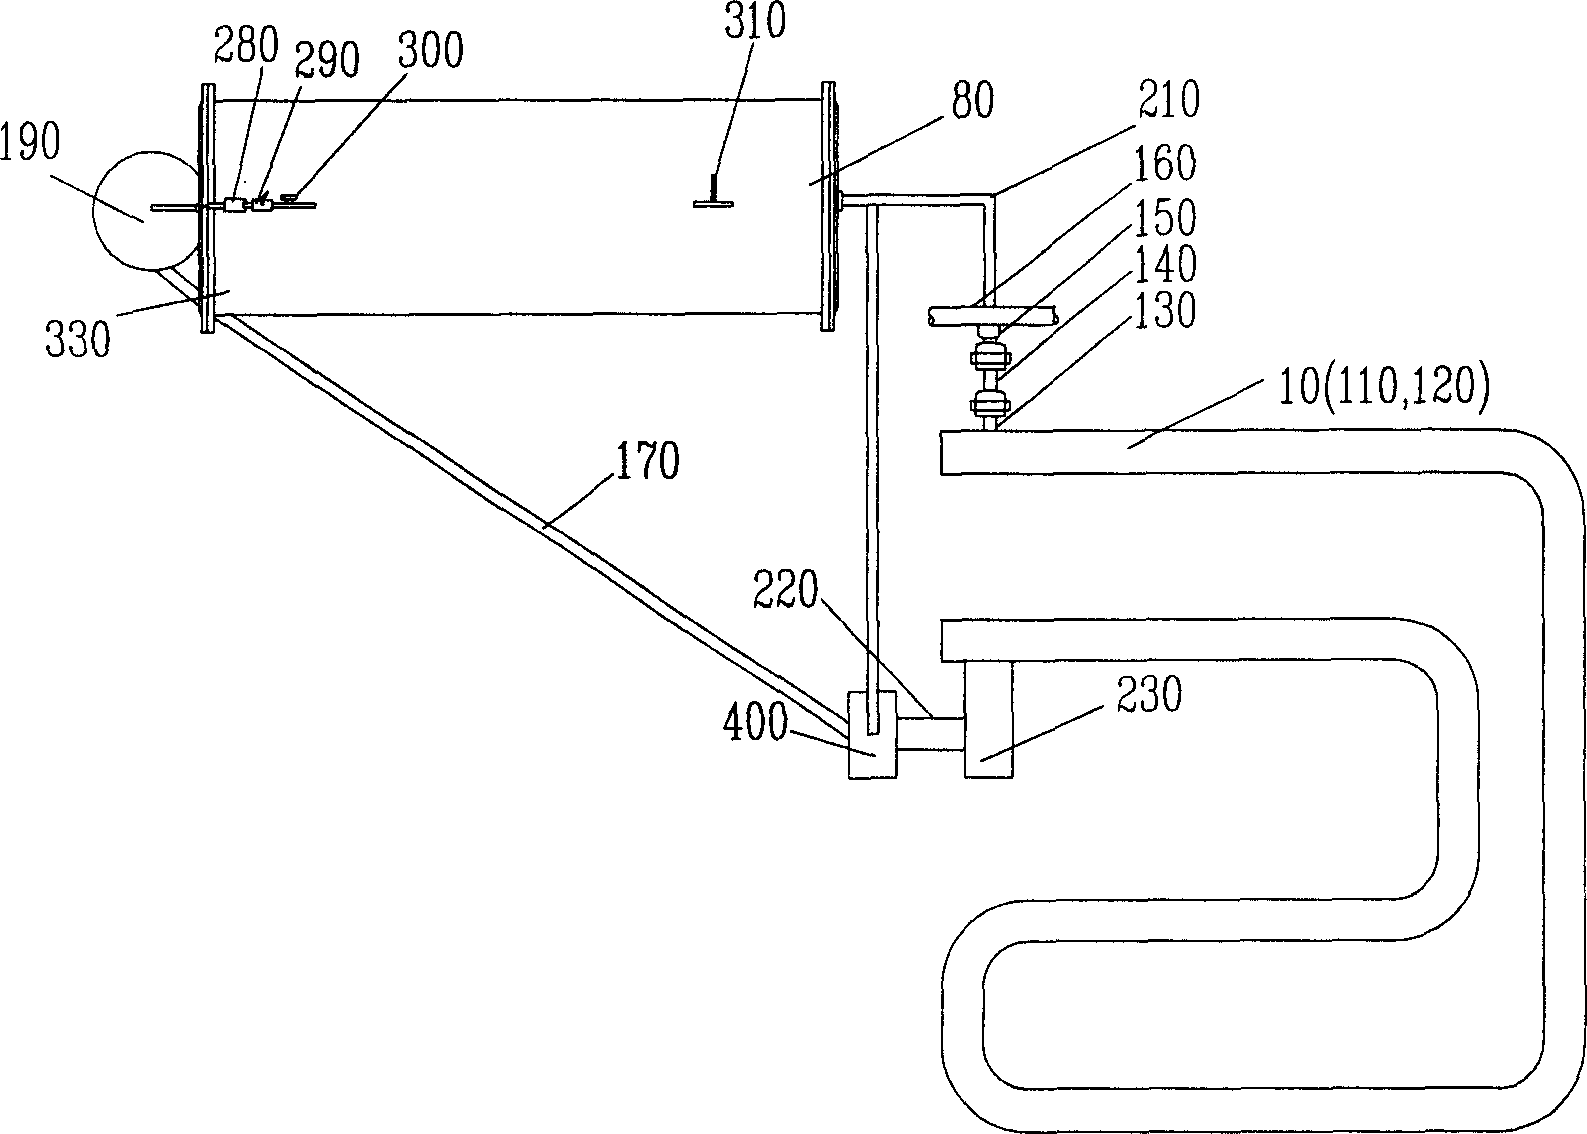 Self-circulation cooling loop of heavy current fixture wire